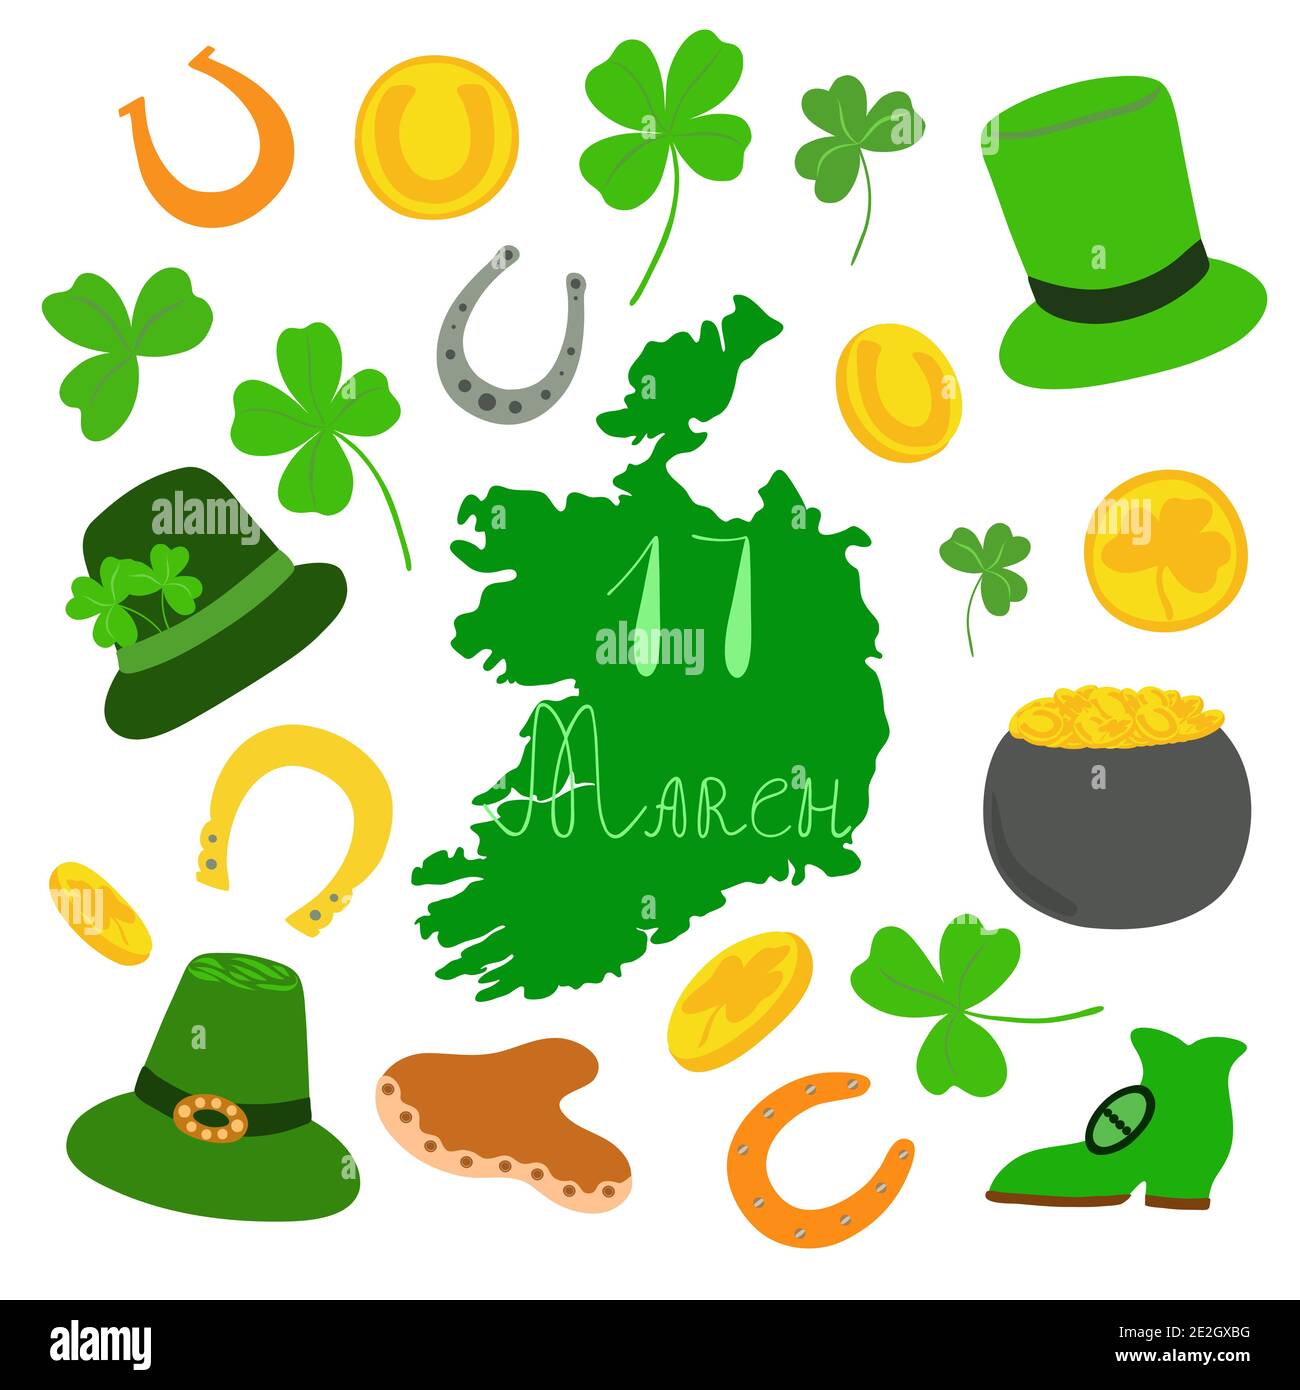 Shamrock leaves, coin, Ireland map, hat, horse shoe, cauldron vector illustration set, a symbol of a national identity of Ireland and its spring holiday, St Patricks day, cute cartoon style Stock Vector